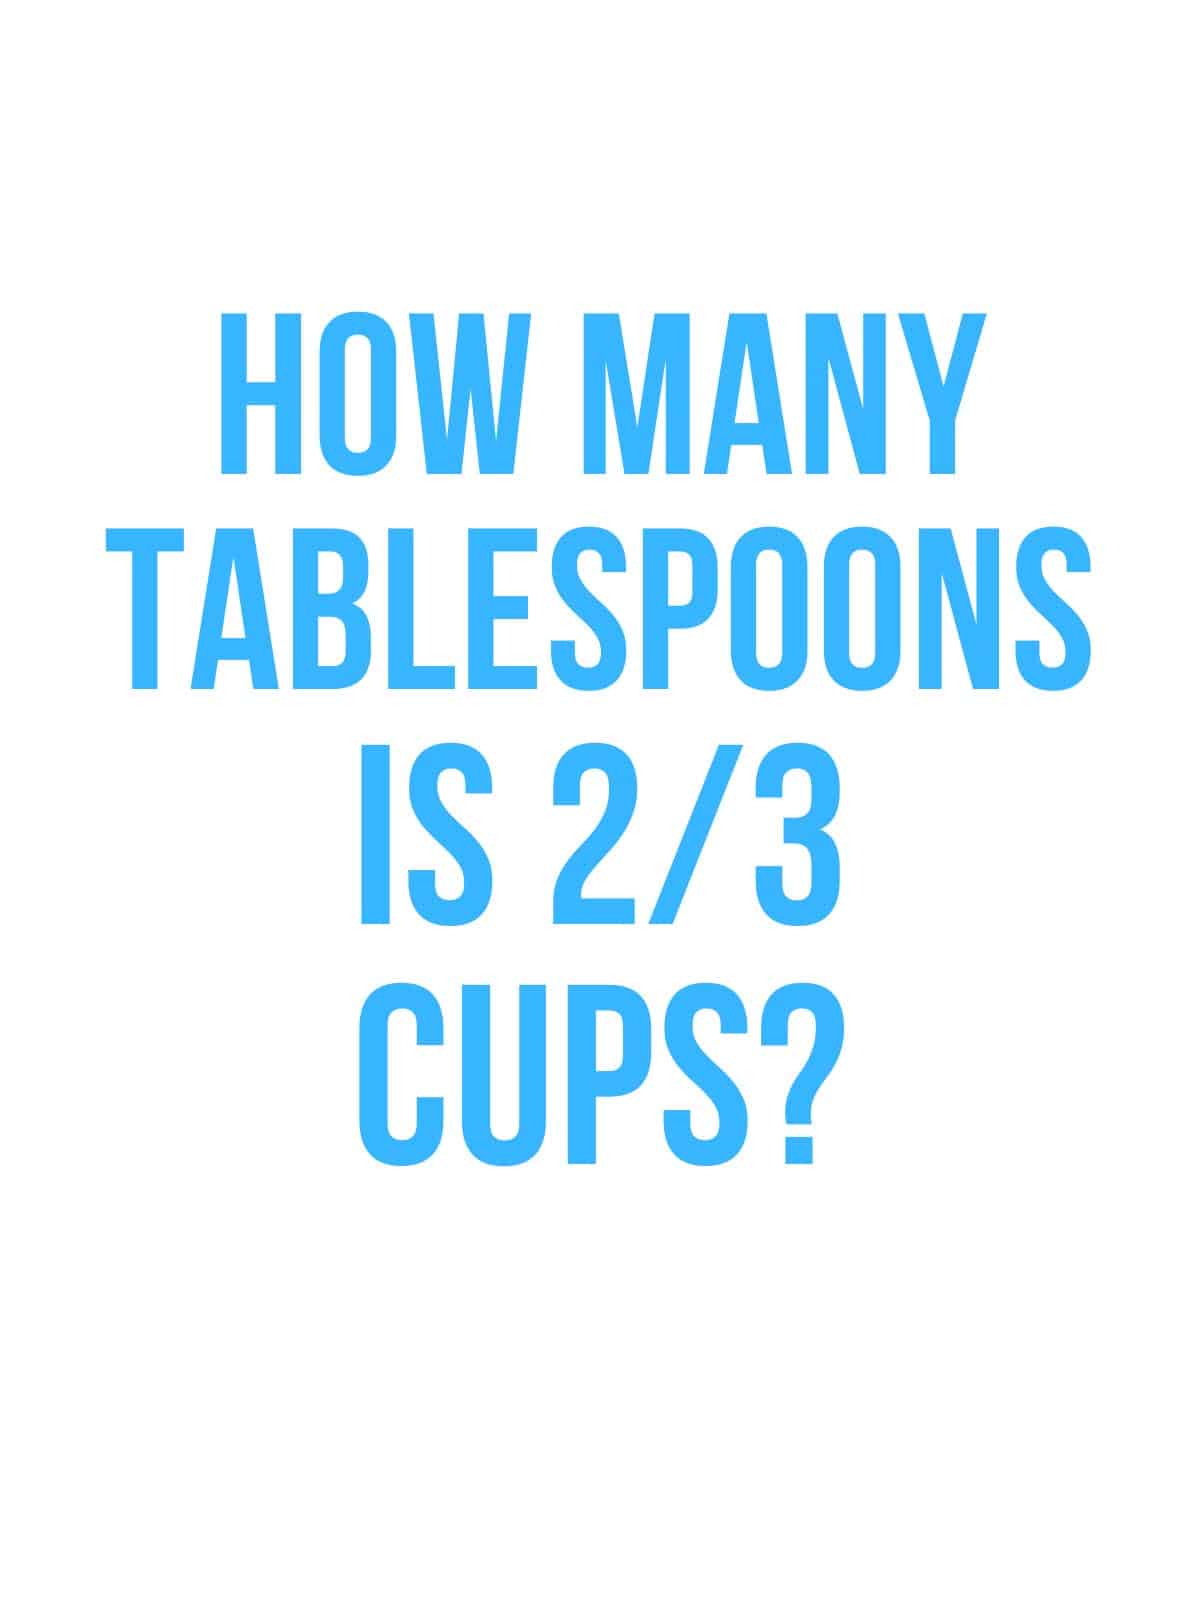 2 3 cups to tablespoons